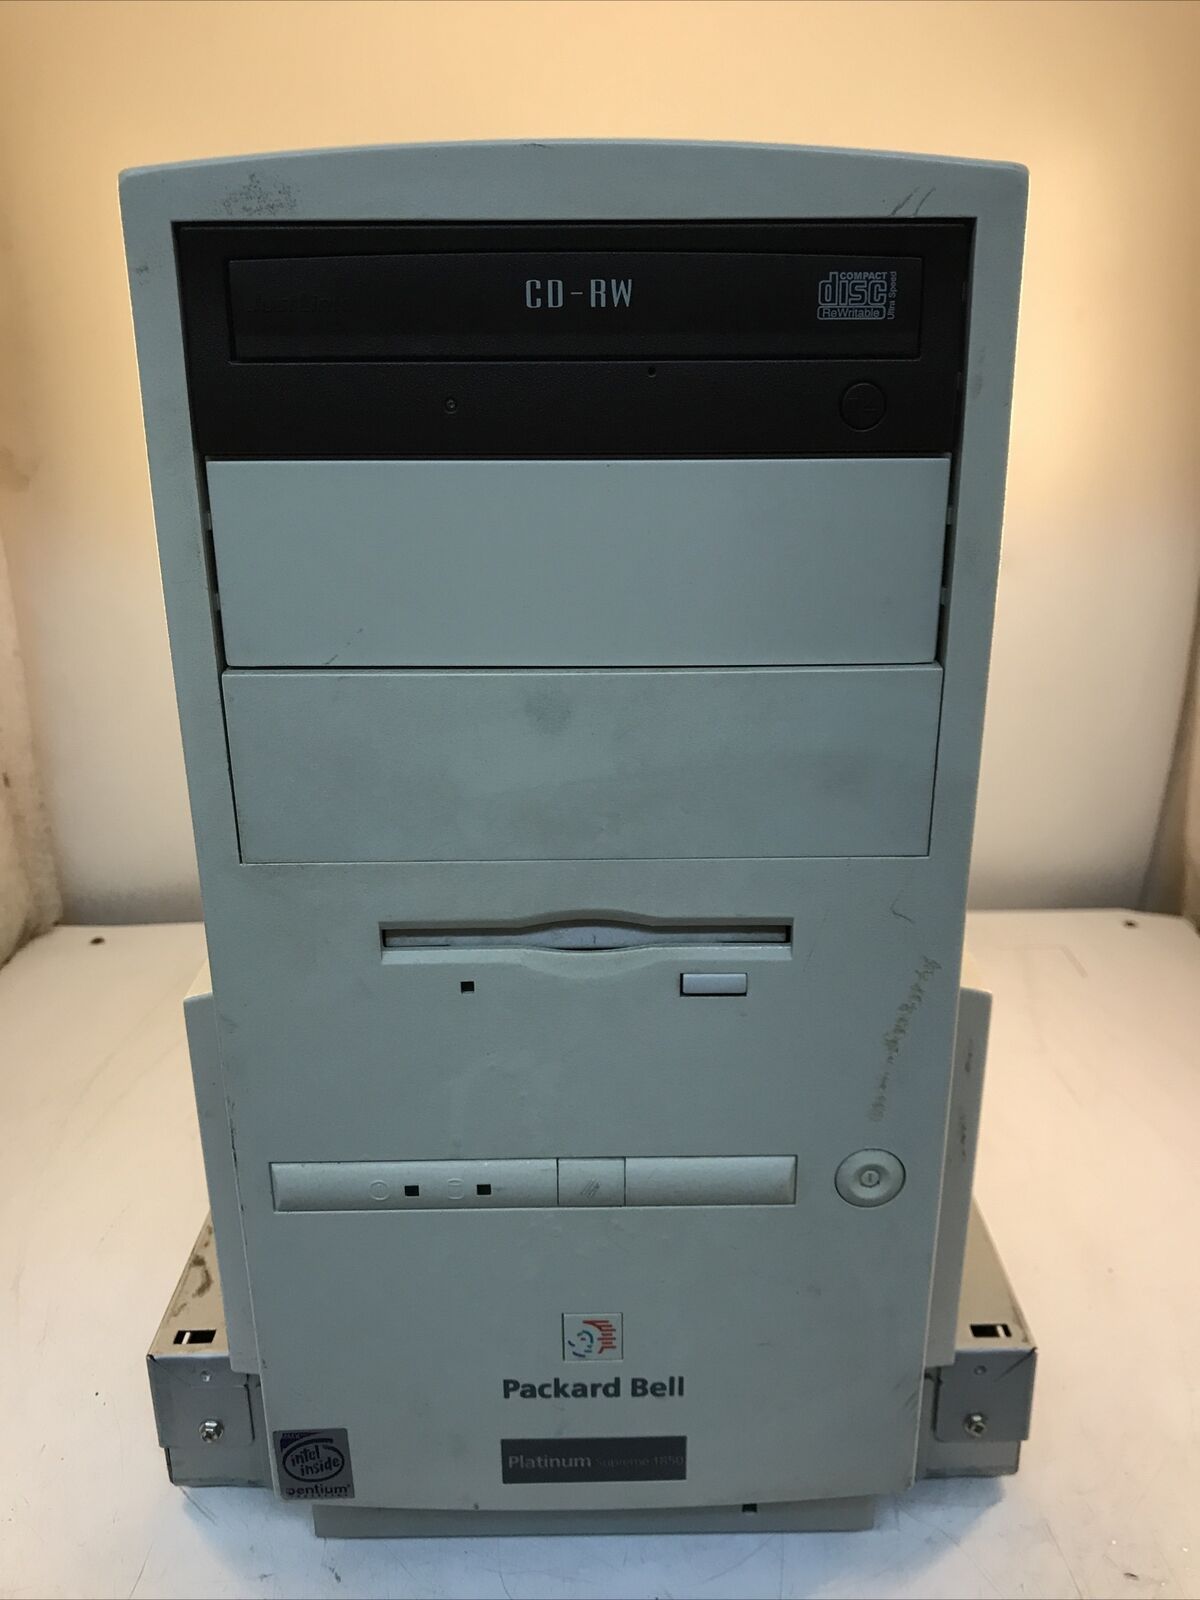 Packard Bell 1540 Supreme, Pentium 133mhz 130MB, A950-TWR, NO HDD Boot to BIOS